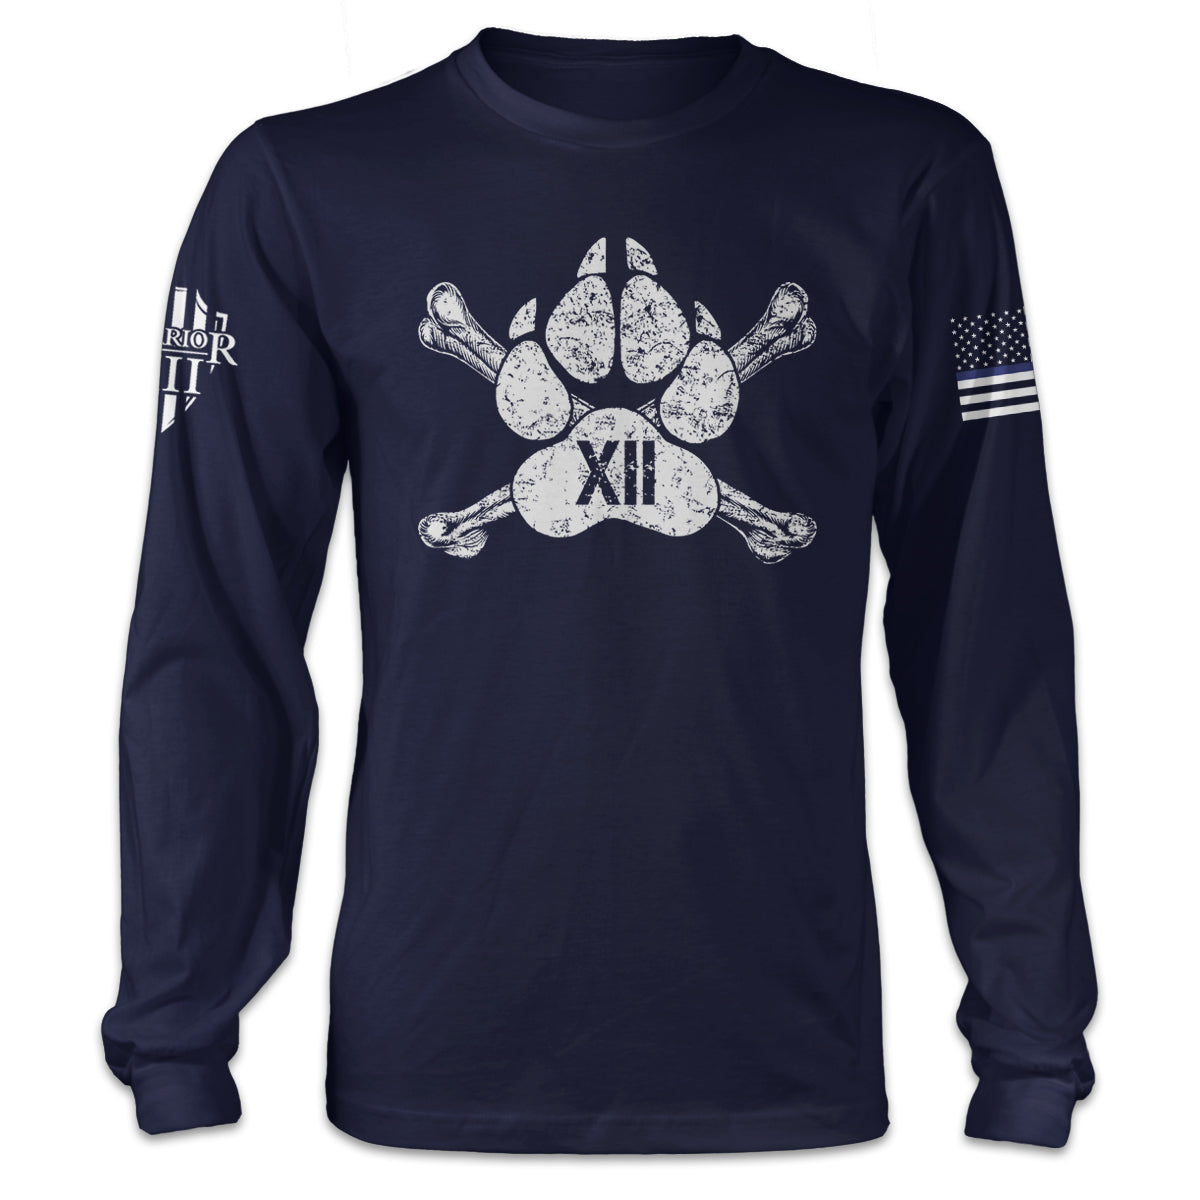 A navy blue long sleeve shirt with a dogs paw printed across the front.